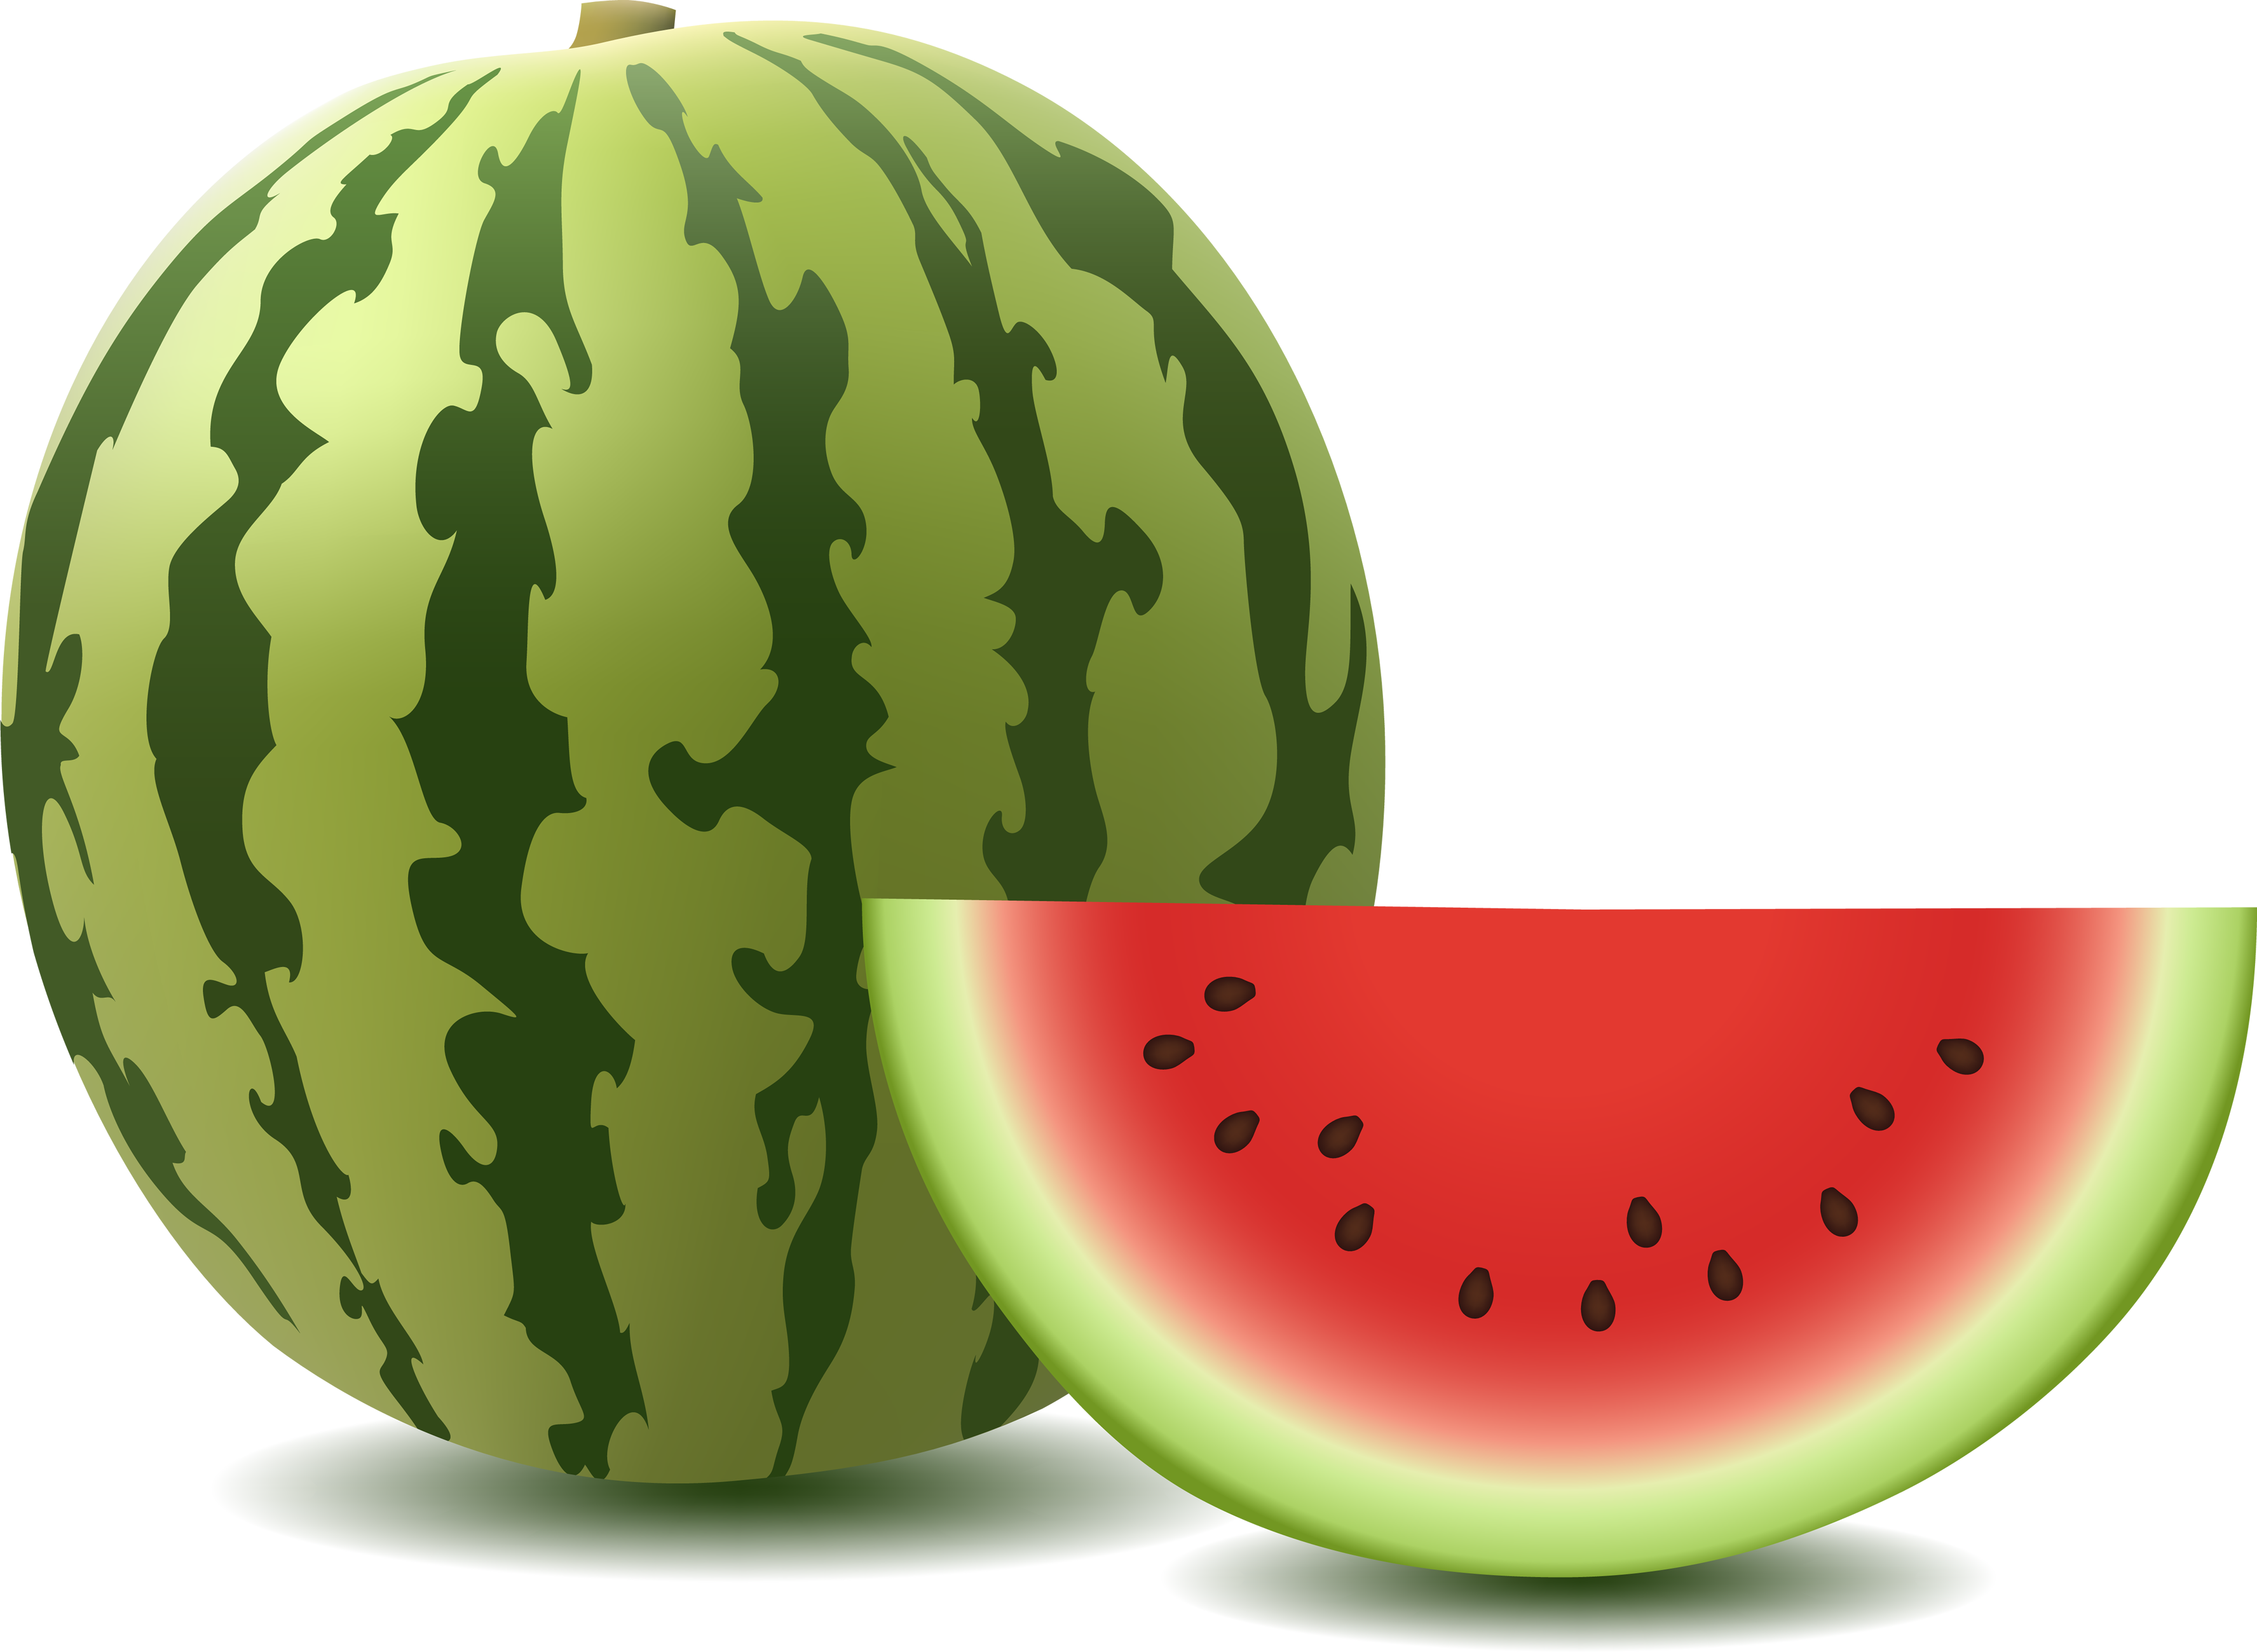 Watermelon Clipart Png